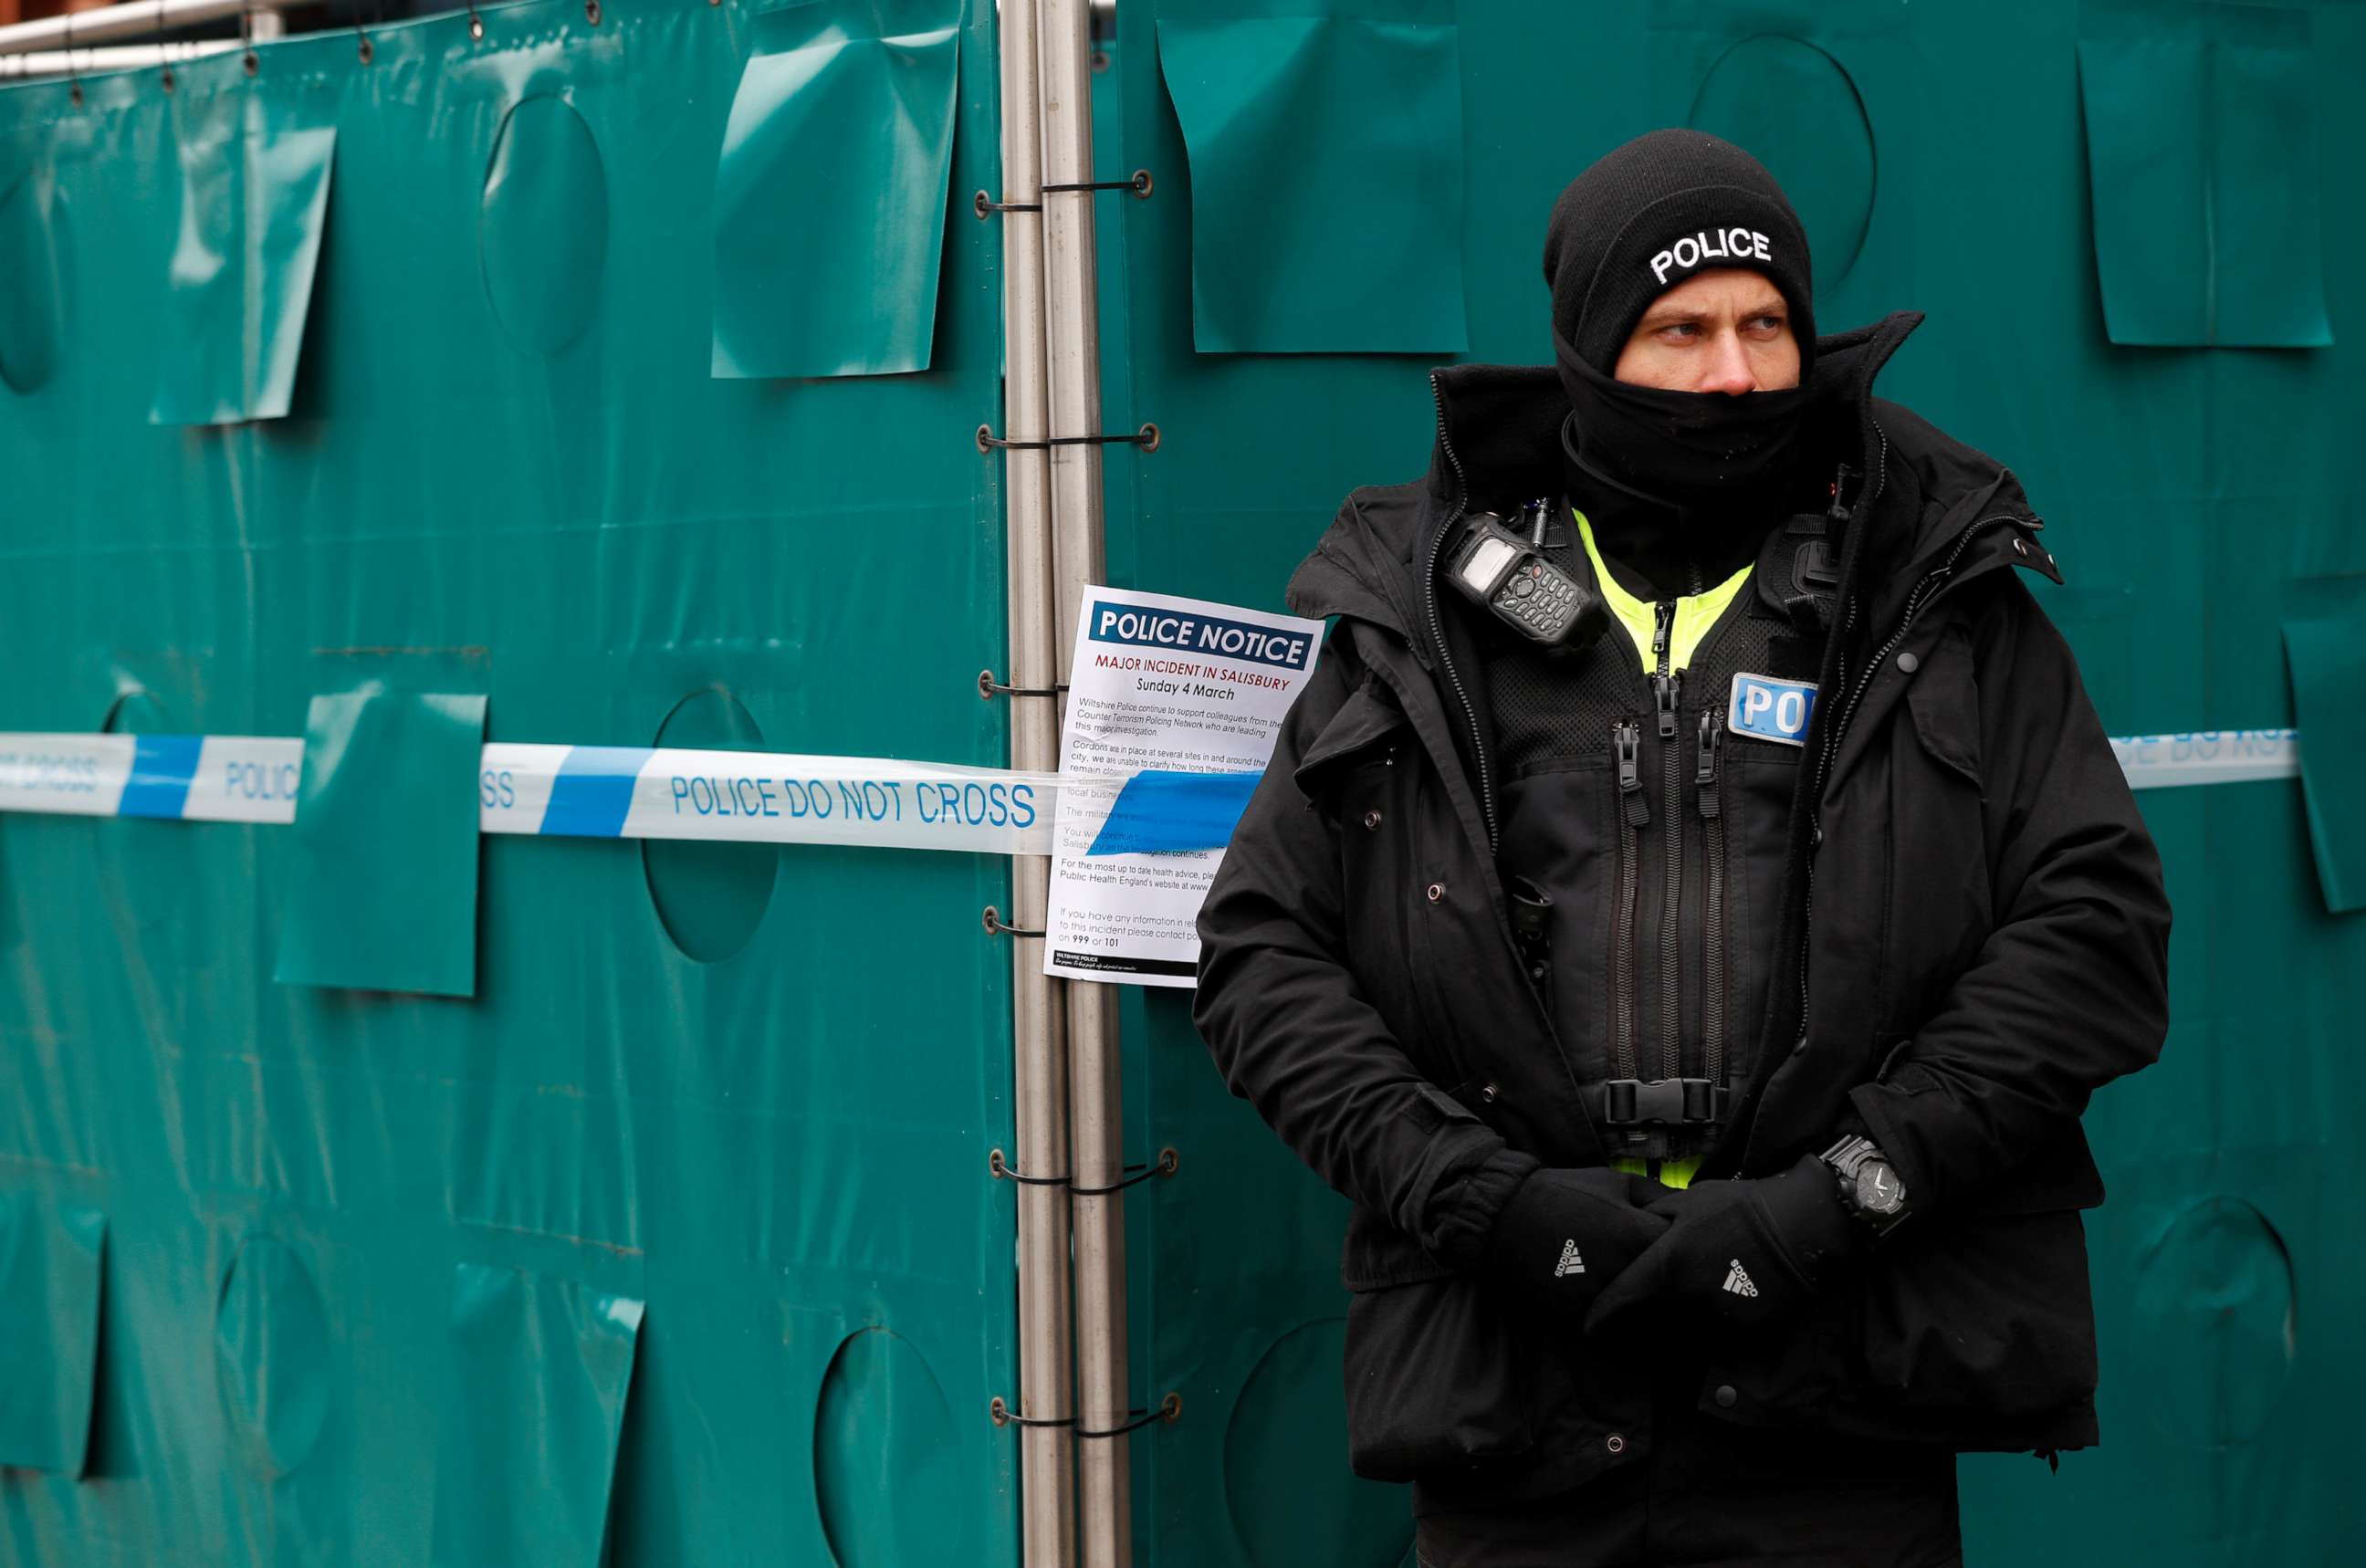 PHOTO: A police officer stands next to screening surrounding a restaurant which was visited by former Russian intelligence officer Sergei Skripal and his daughter Yulia after being poisoned in Salisbury, Britain, March 19, 2018.